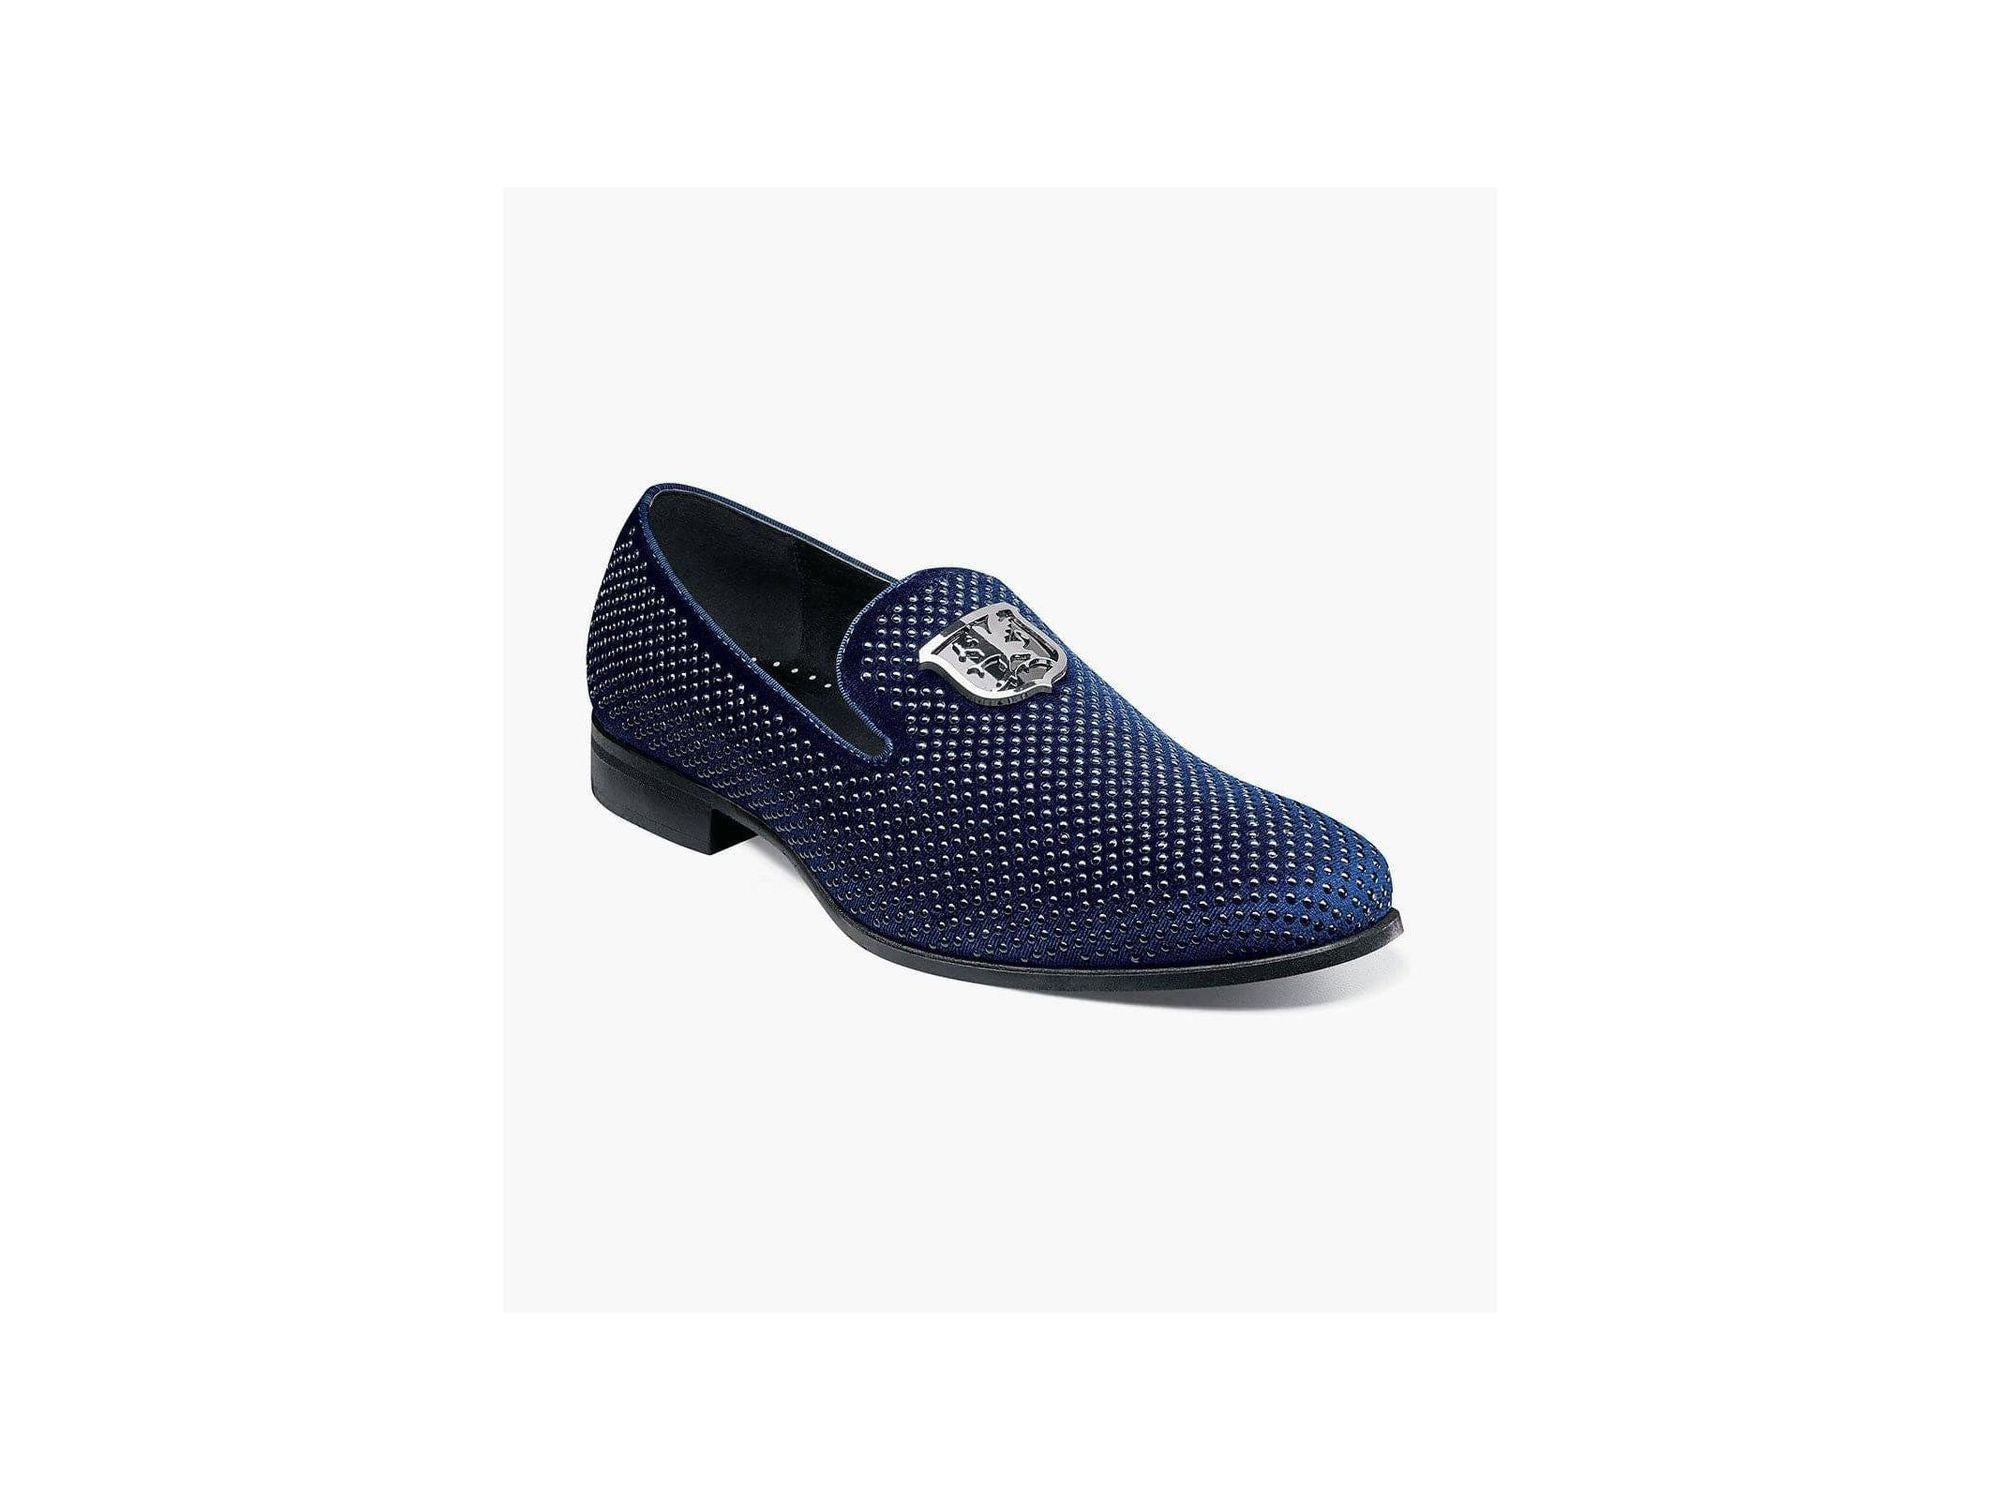 Stacy Adams Swagger Formal Loafer in Navy & Marine - Rainwater's Men's Clothing and Tuxedo Rental